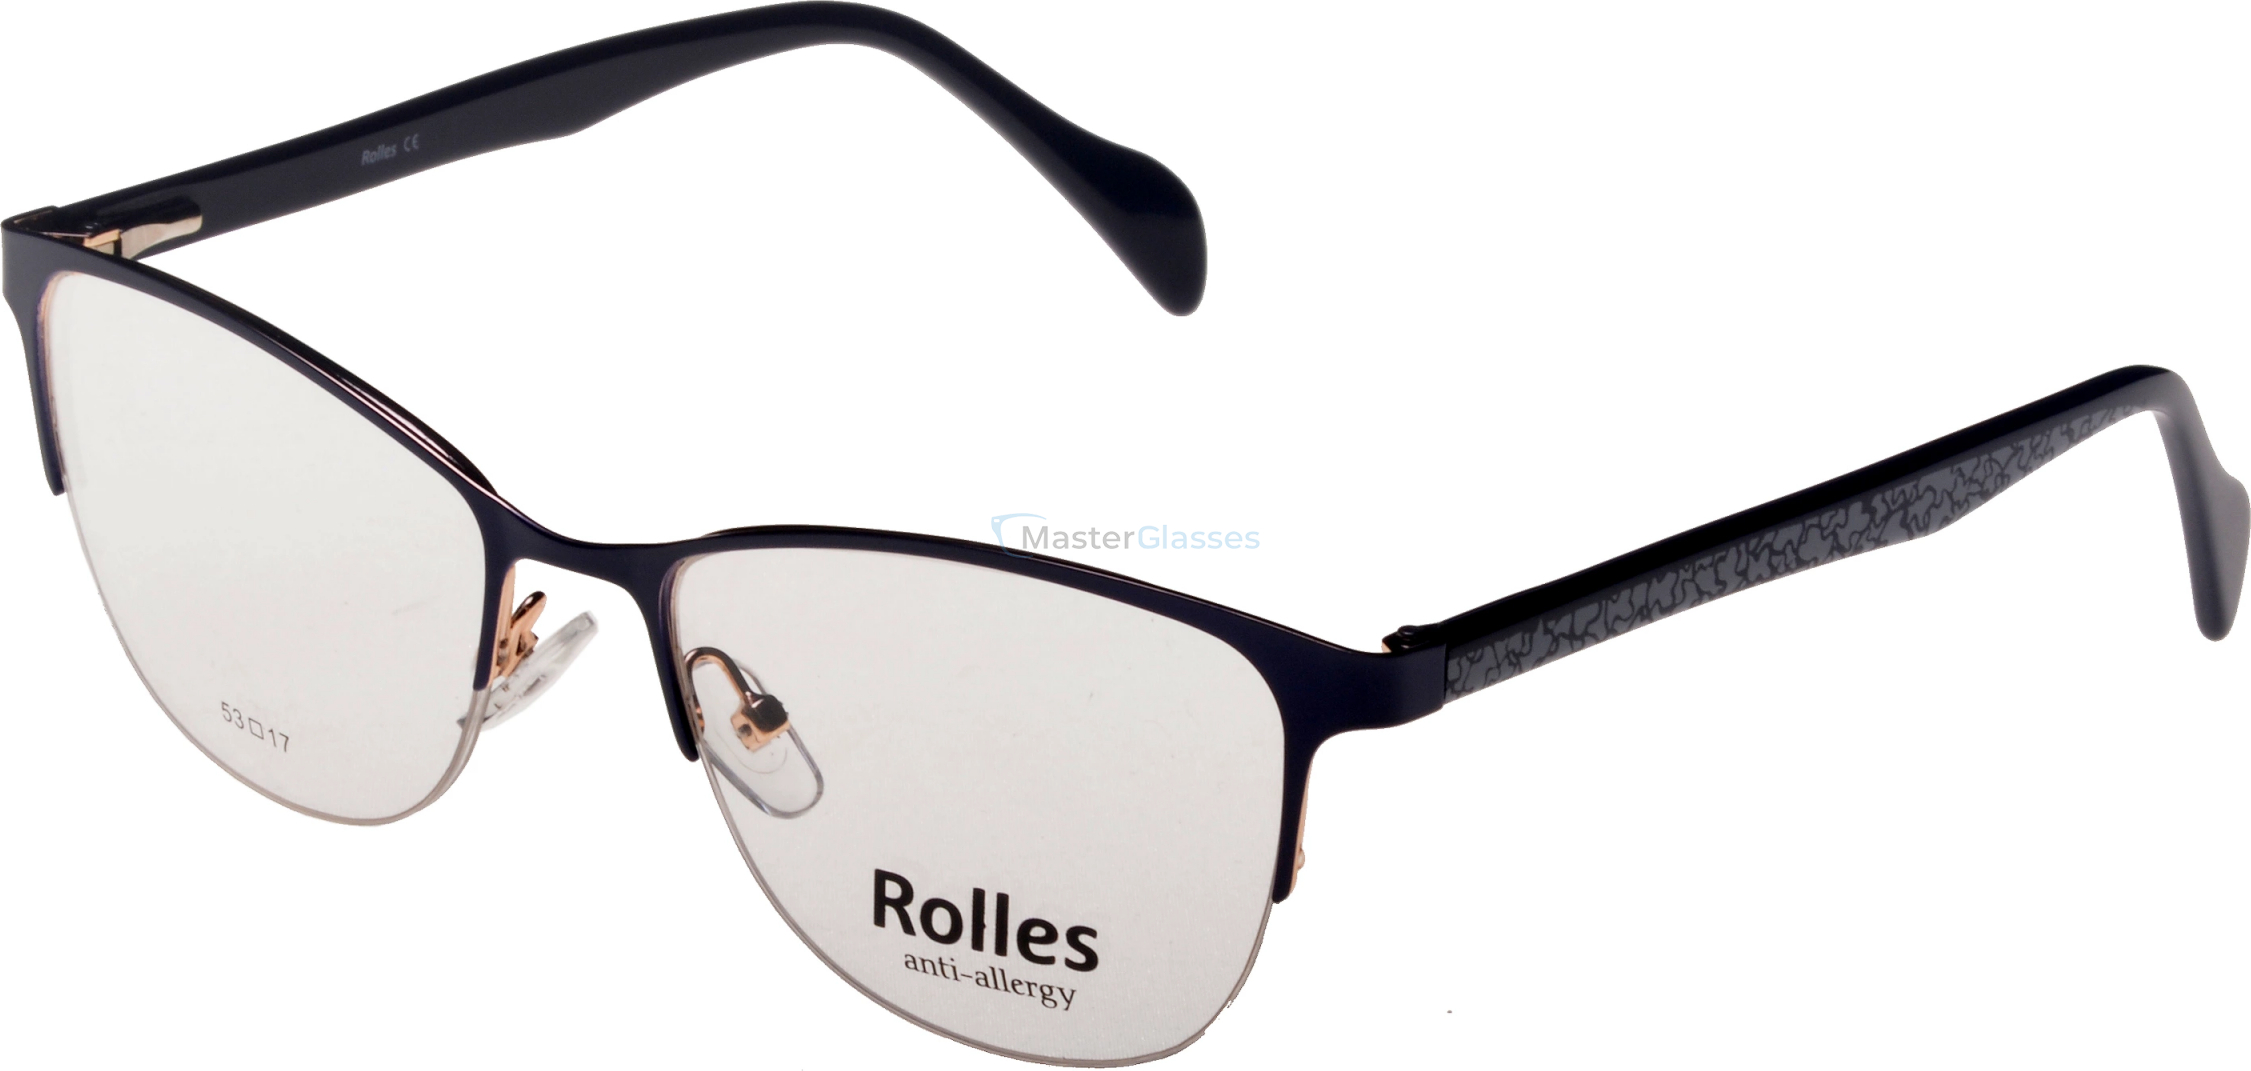  Rolles 716 02